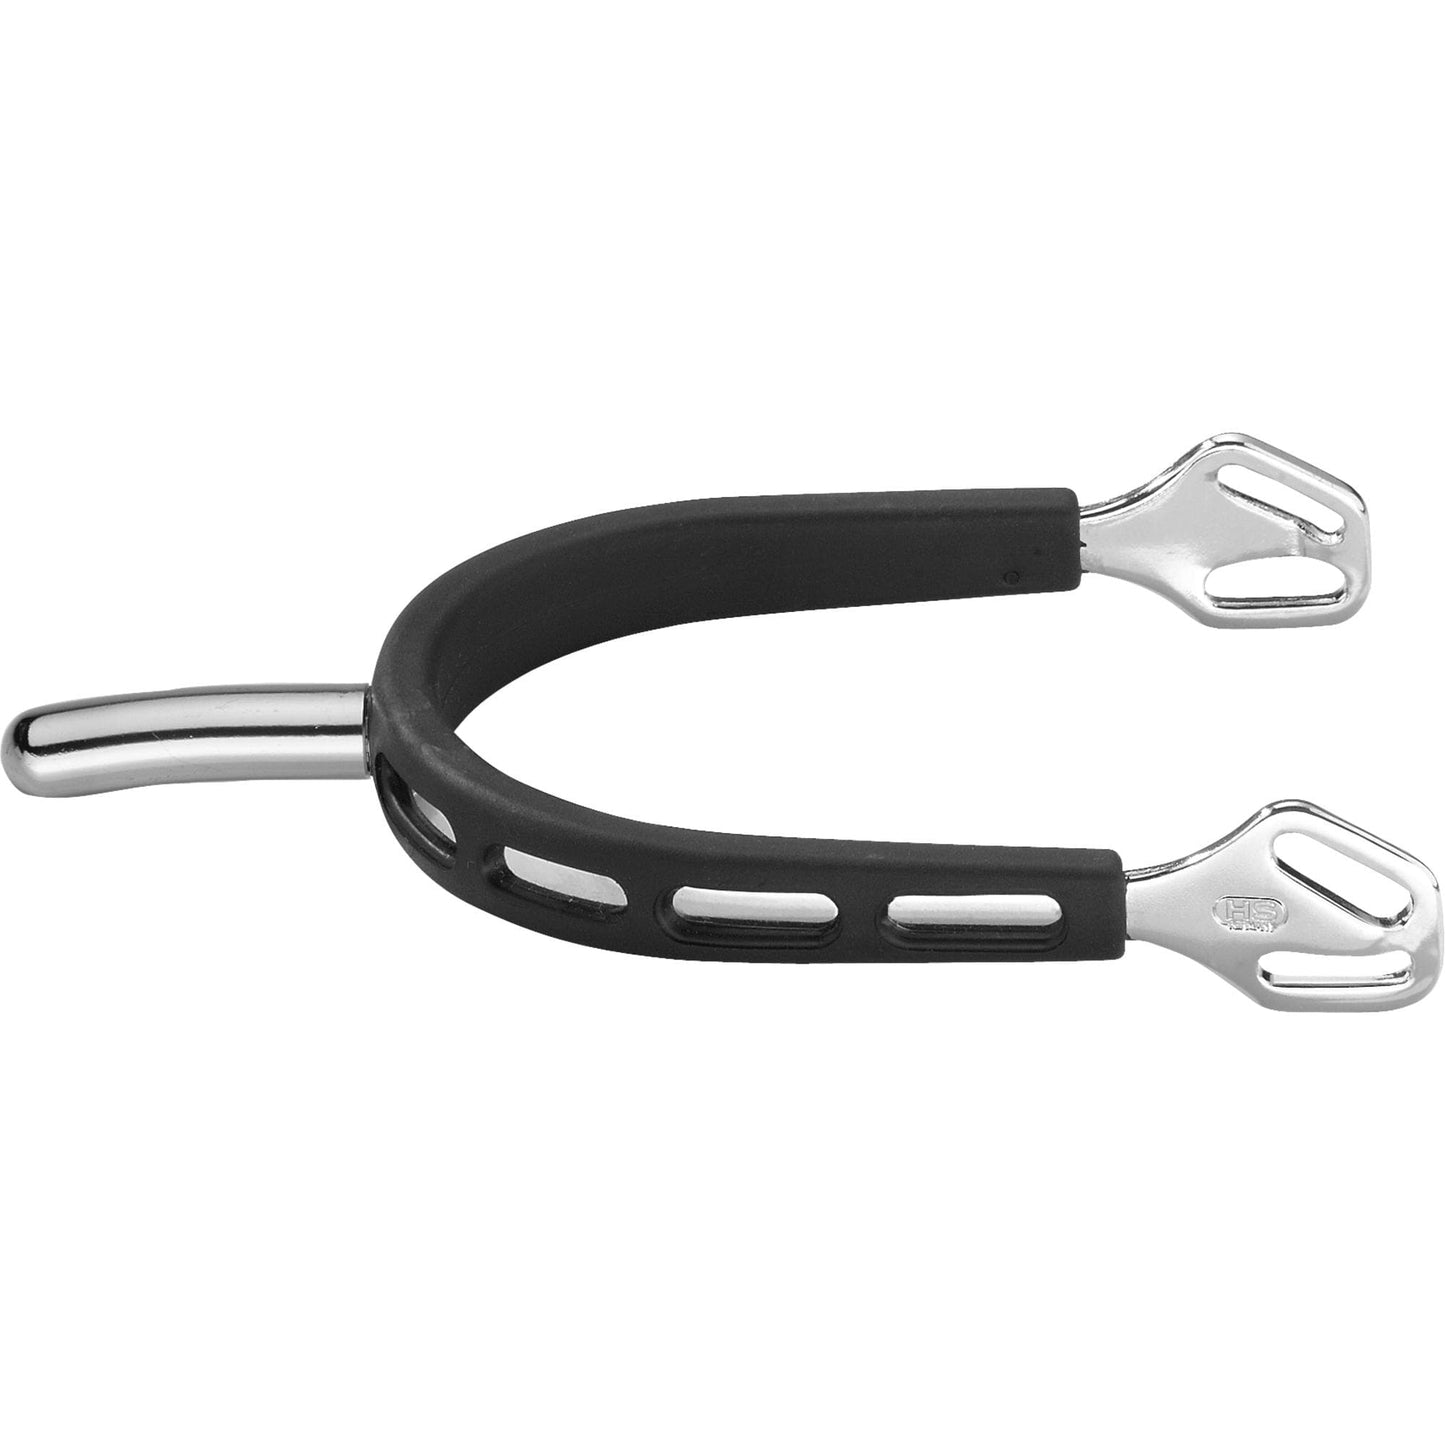 Herm Sprenger Ultra Fit Extra Grip Rounded Rowel Spurs with Balkenhol Fastening